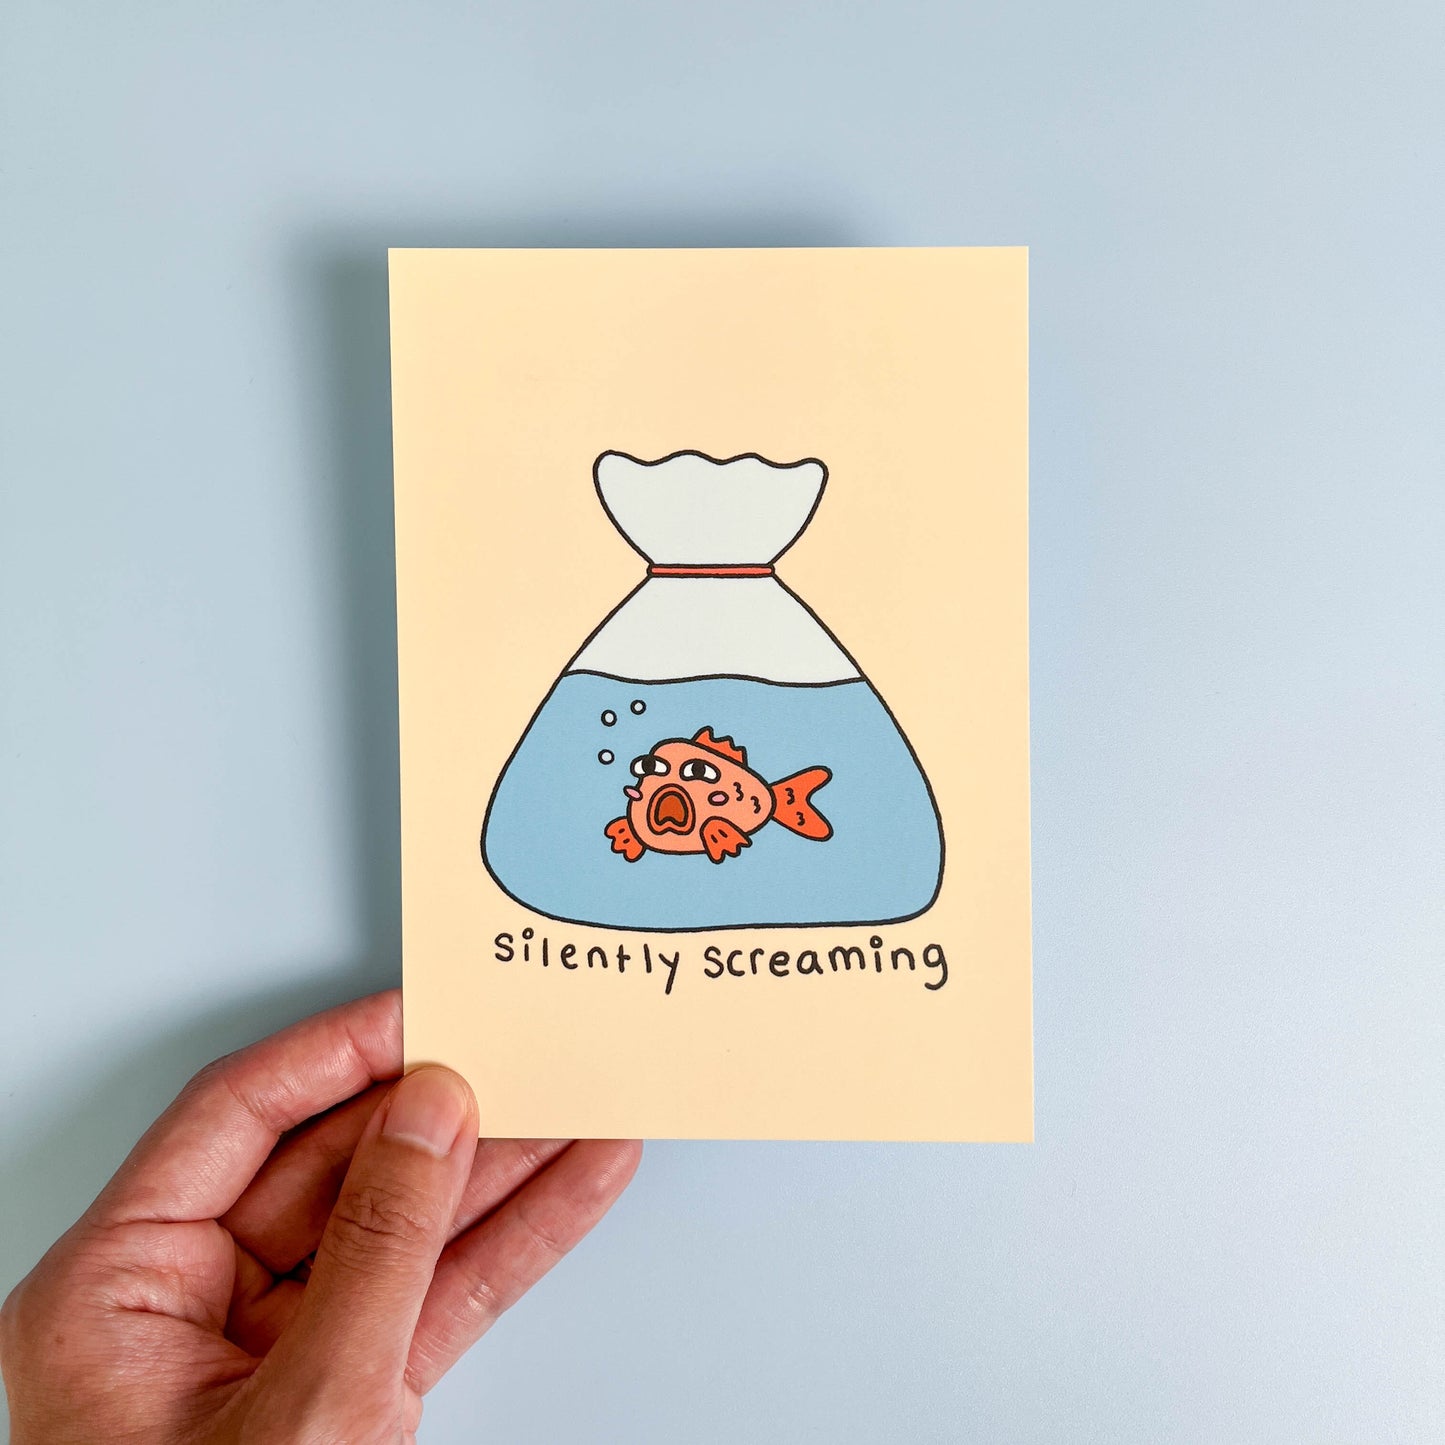 Goldfish In A Bag "Silently Screaming" Postcard